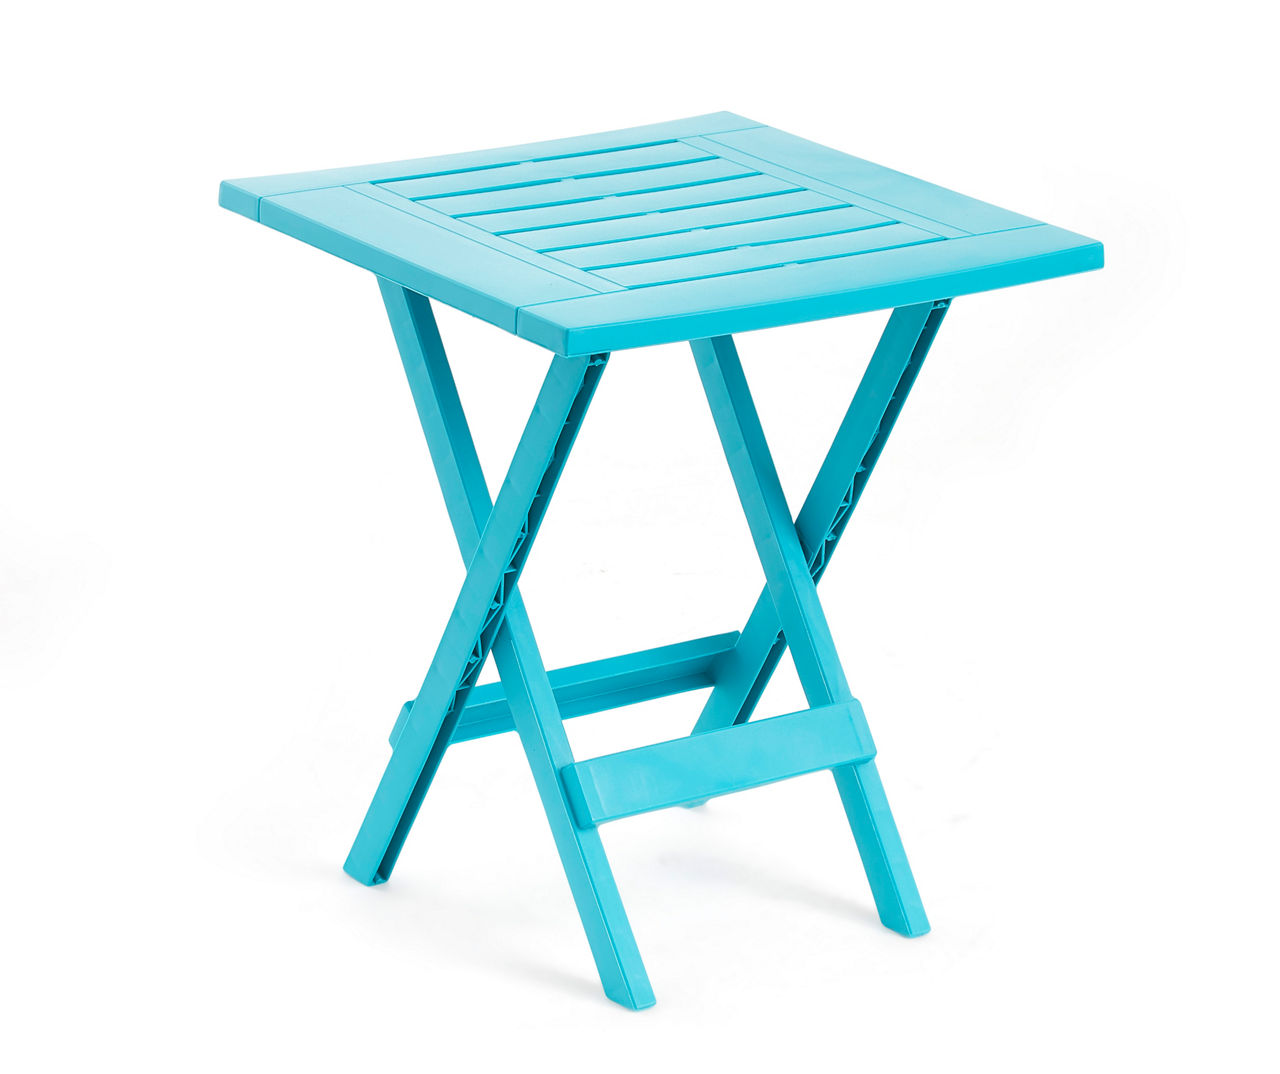 Gracious Living Teal Adirondack Plastic Outdoor Folding Side Table